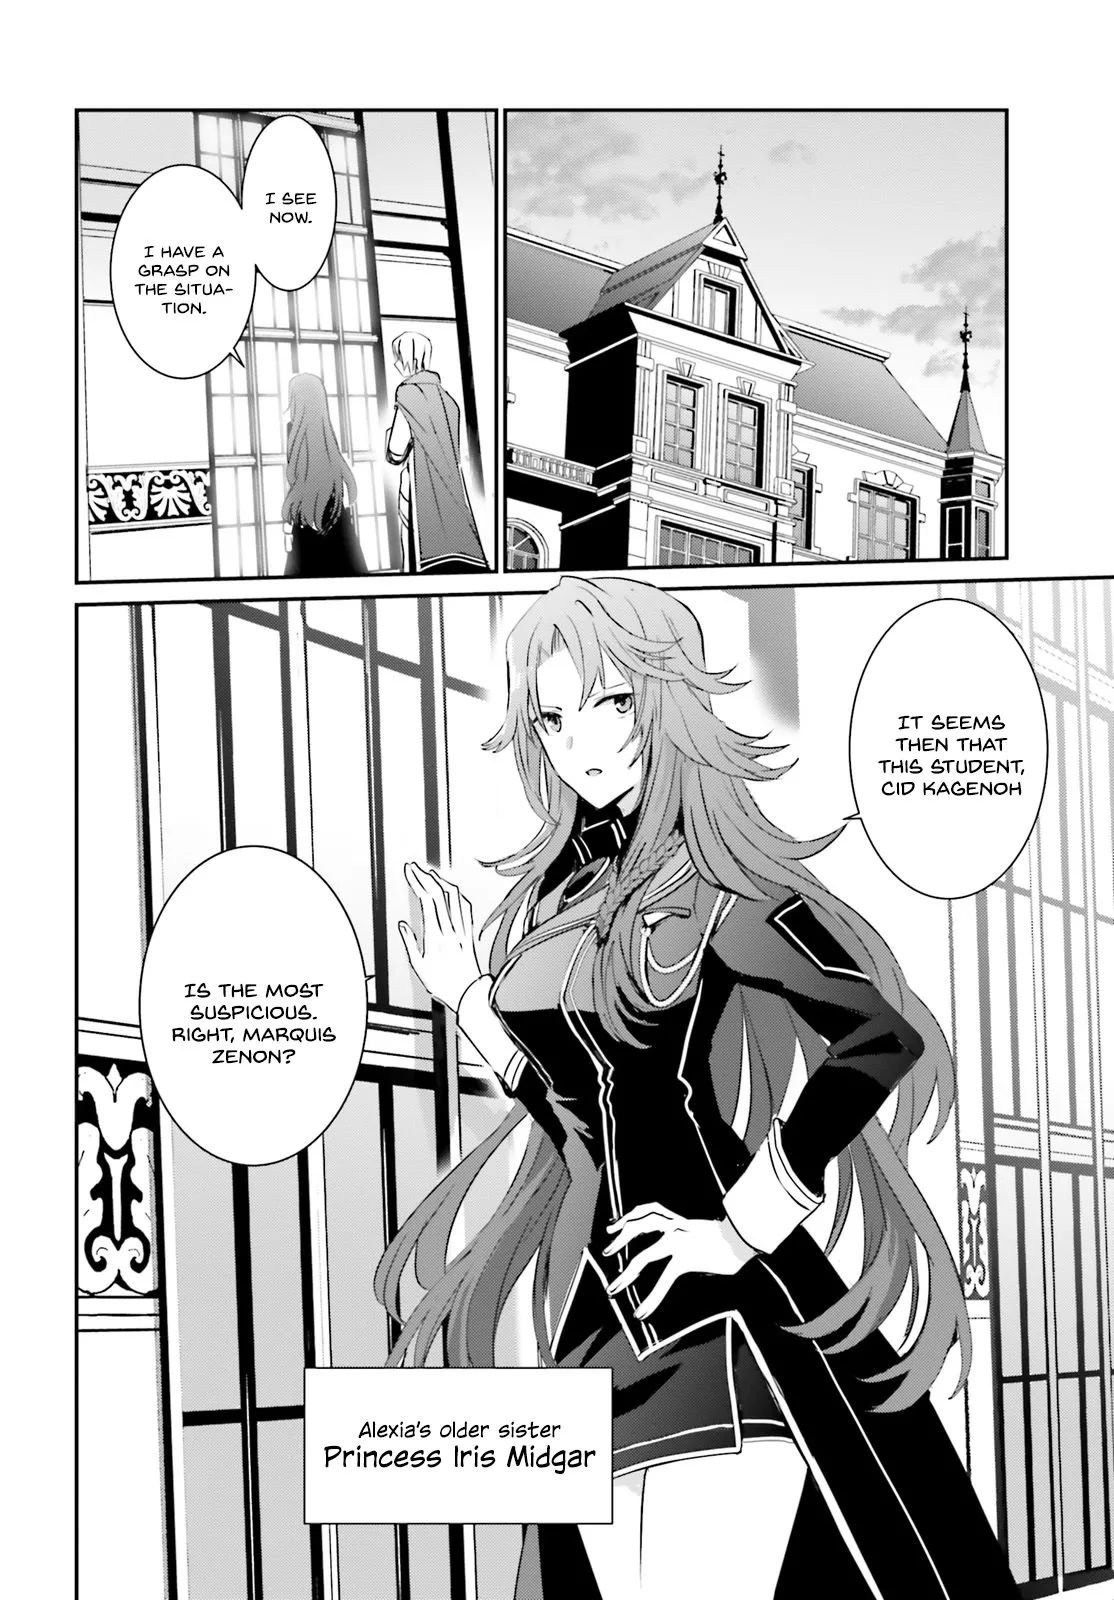 Read The Eminence in Shadow Manga Online - [Latest Chapters]